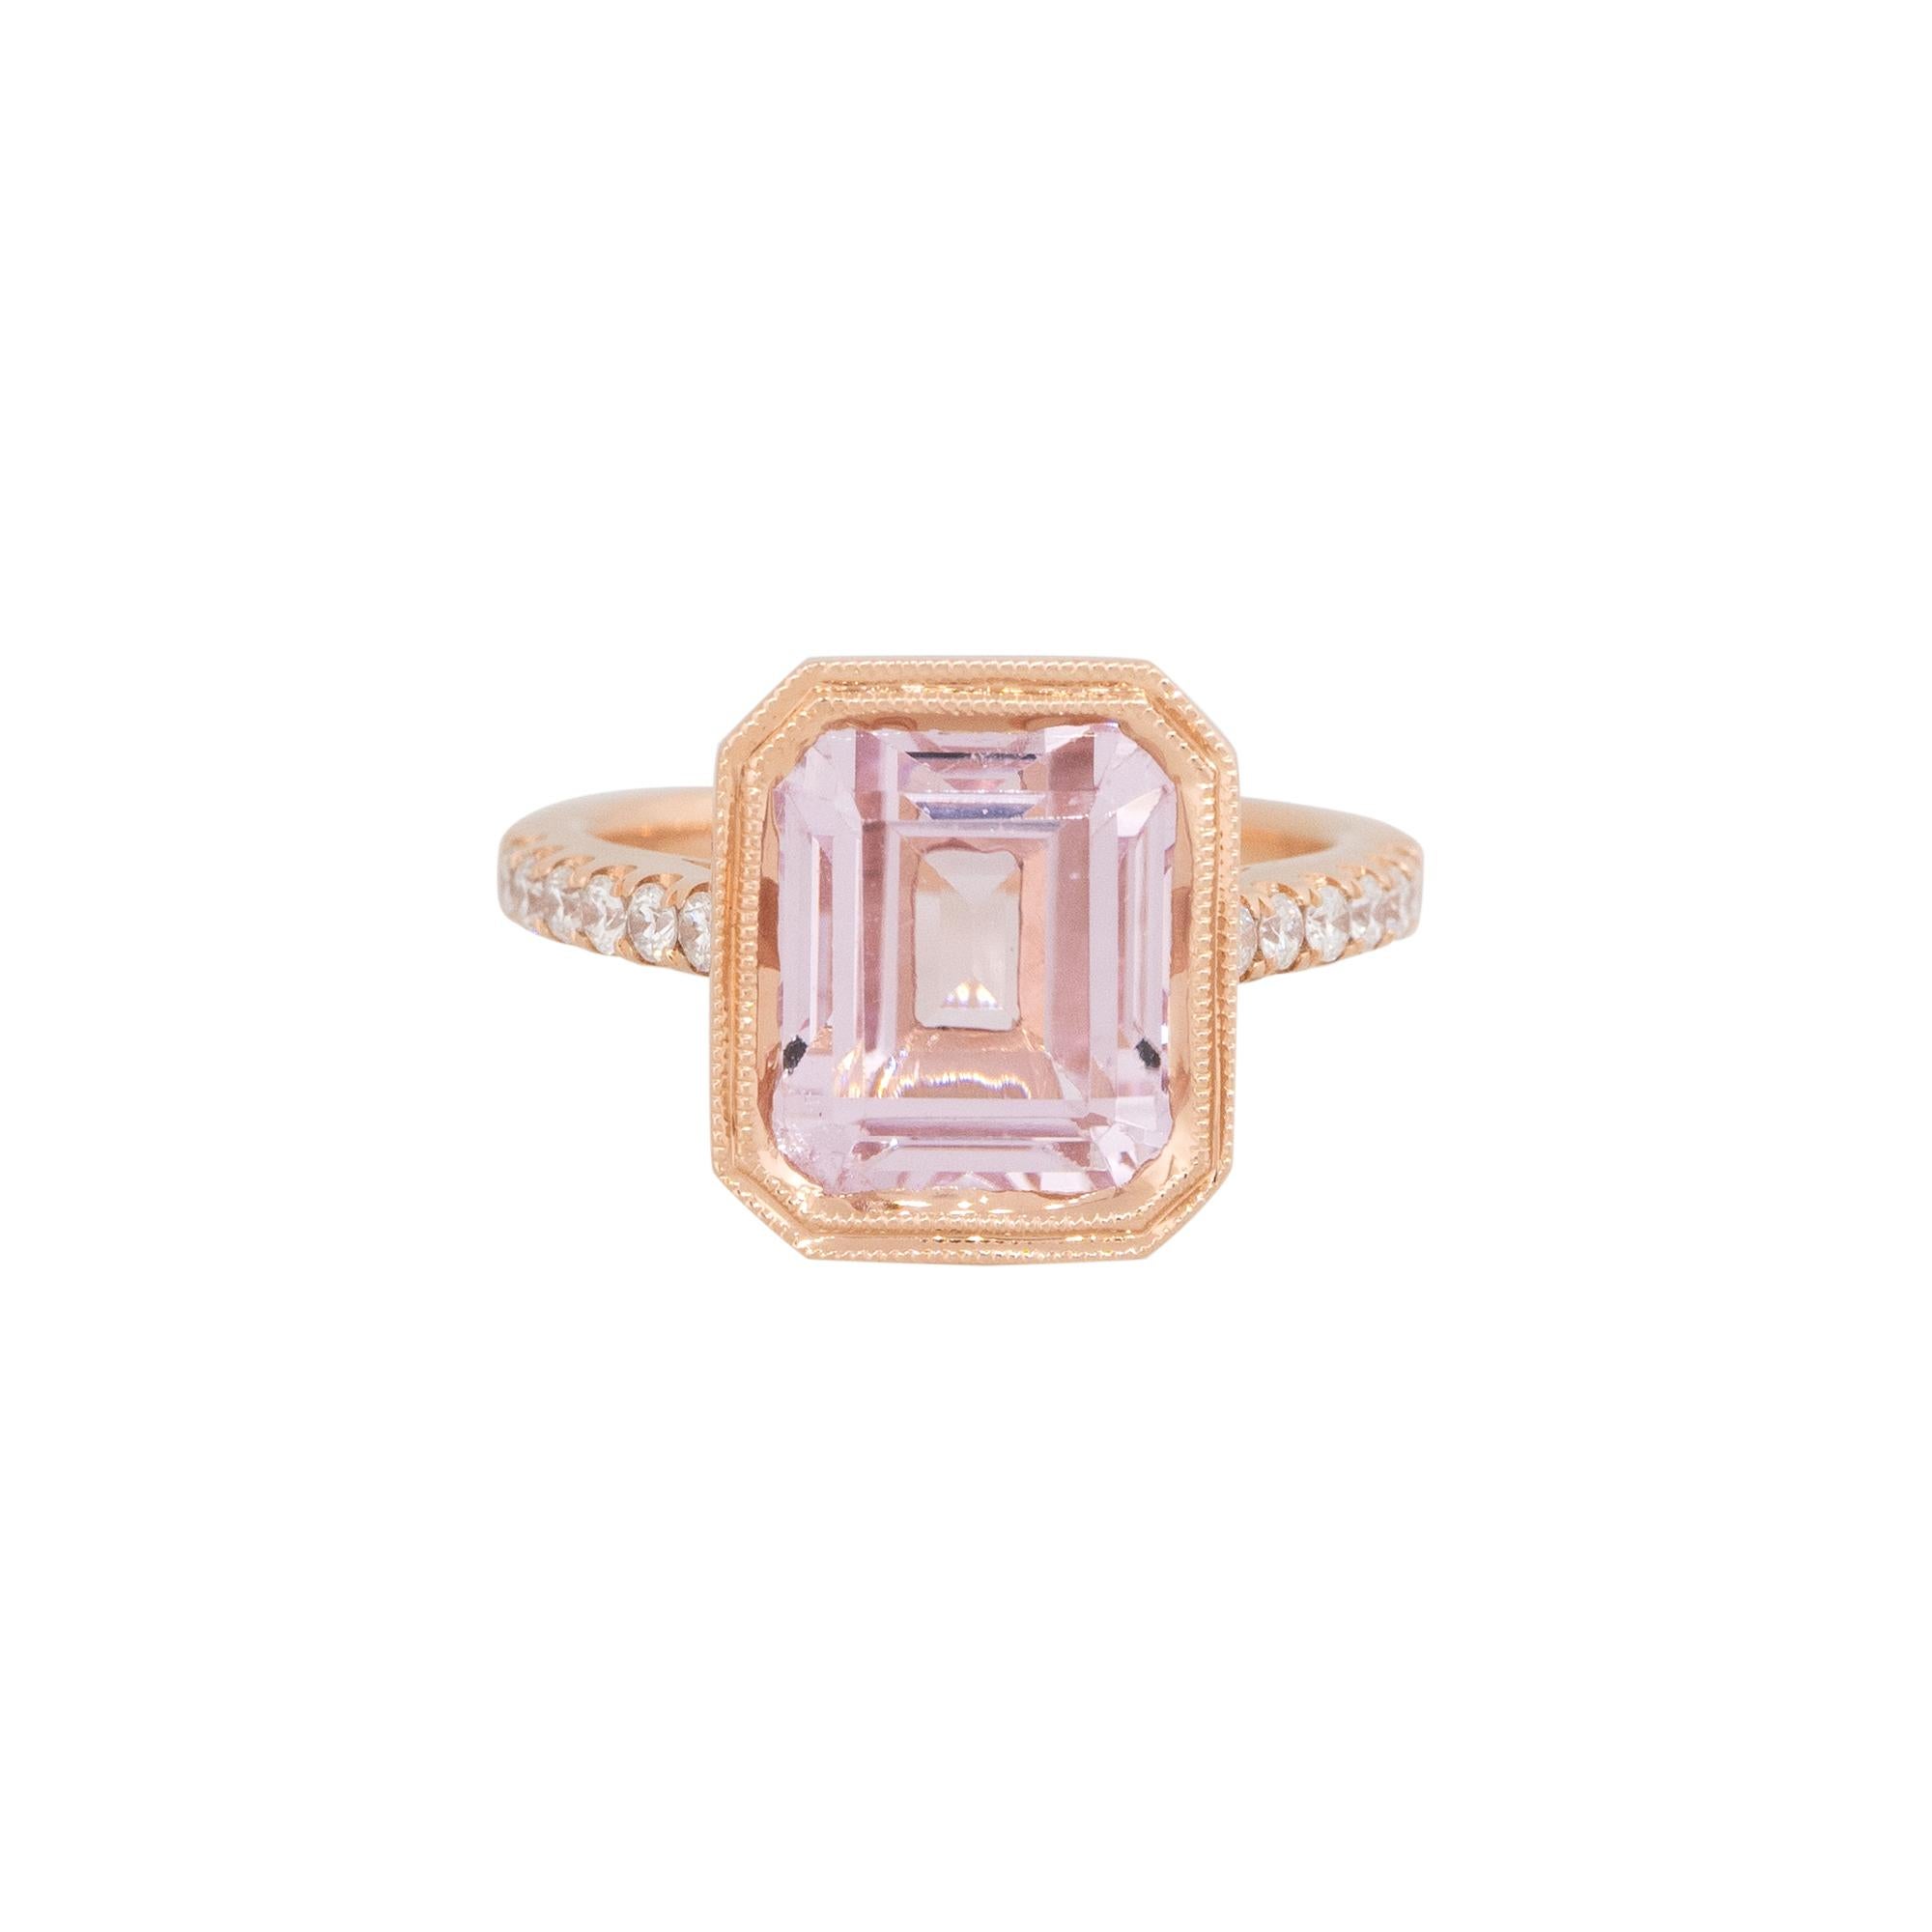 18k Rose Gold 7.90ct Kunzite & 0.27ct Diamond Ring

Product: Kunzite & Diamond Ring
Material: 18k Rose Gold
Gemstone/ Diamond Details: The main stone is a bezel set, Kunzite, weighing approximately 7.90 carats. There are approximately 0.27 carats of